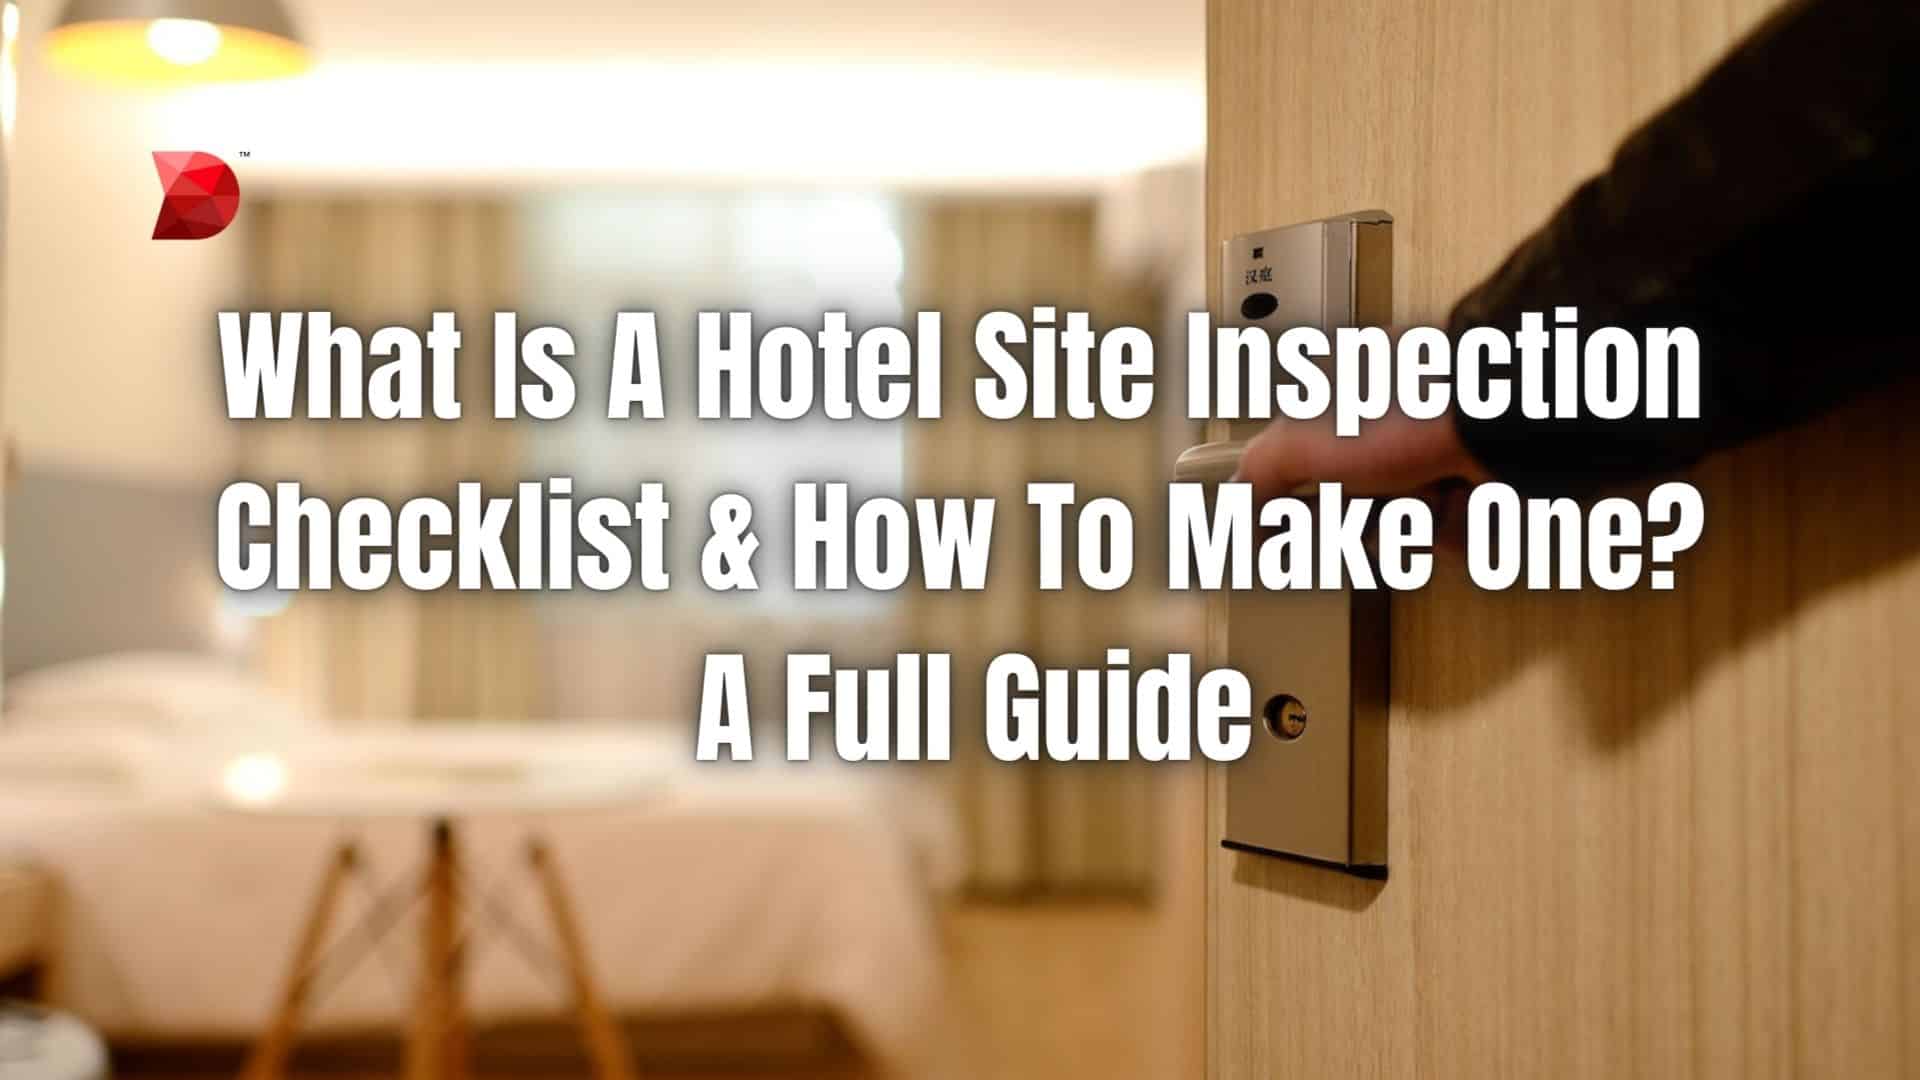 What Is A Hotel Site Inspection Checklist & How To Make One A Full Guide